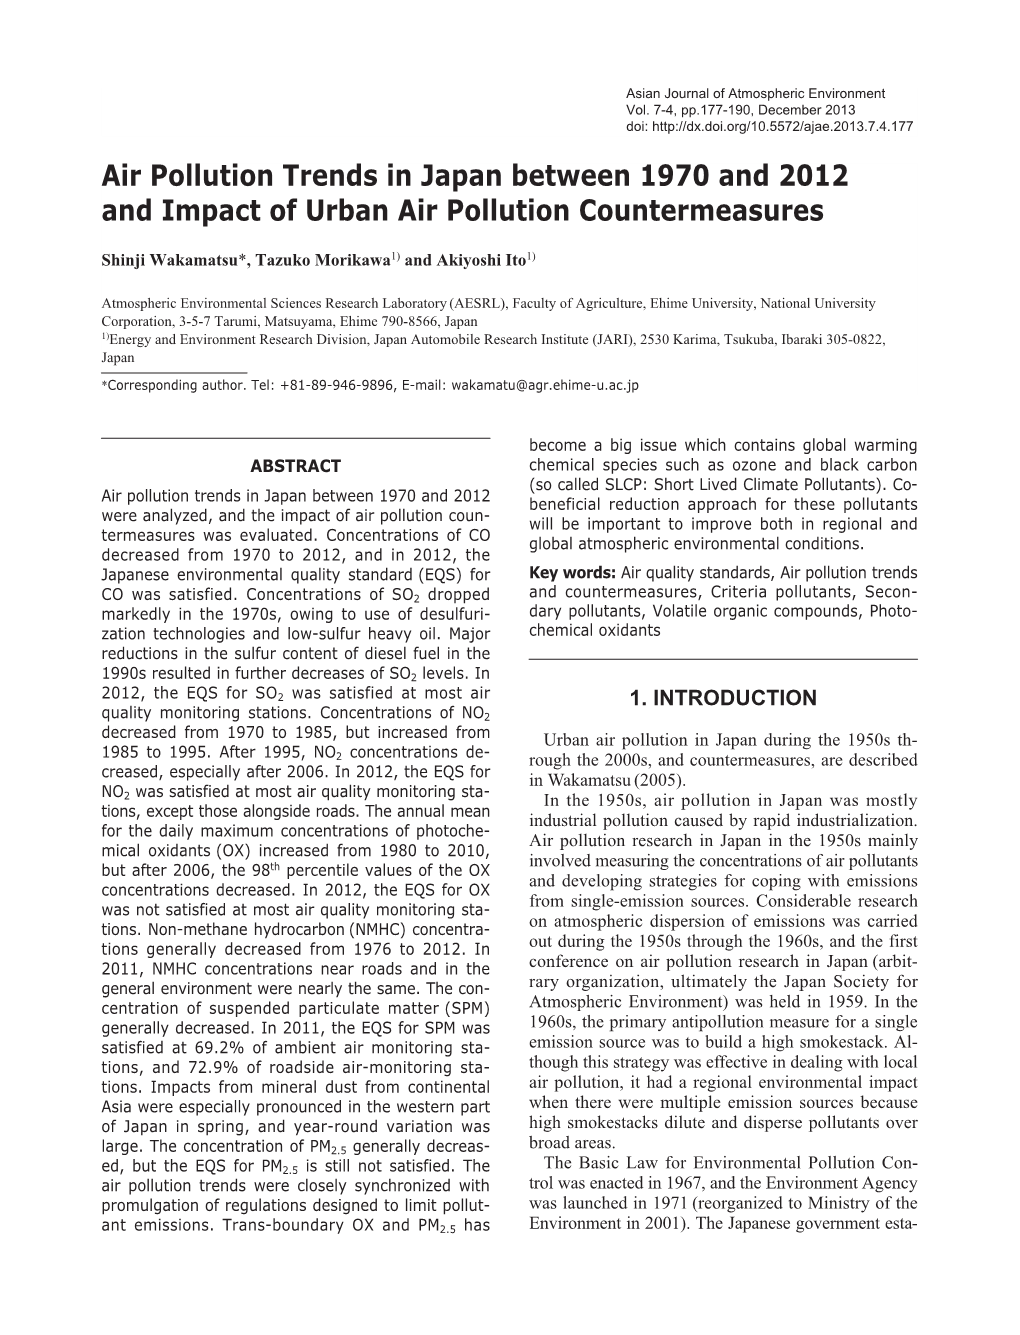 Air Pollution Trends in Japan Between 1970 and 2012 and Impact of Urban Air Pollution Countermeasures